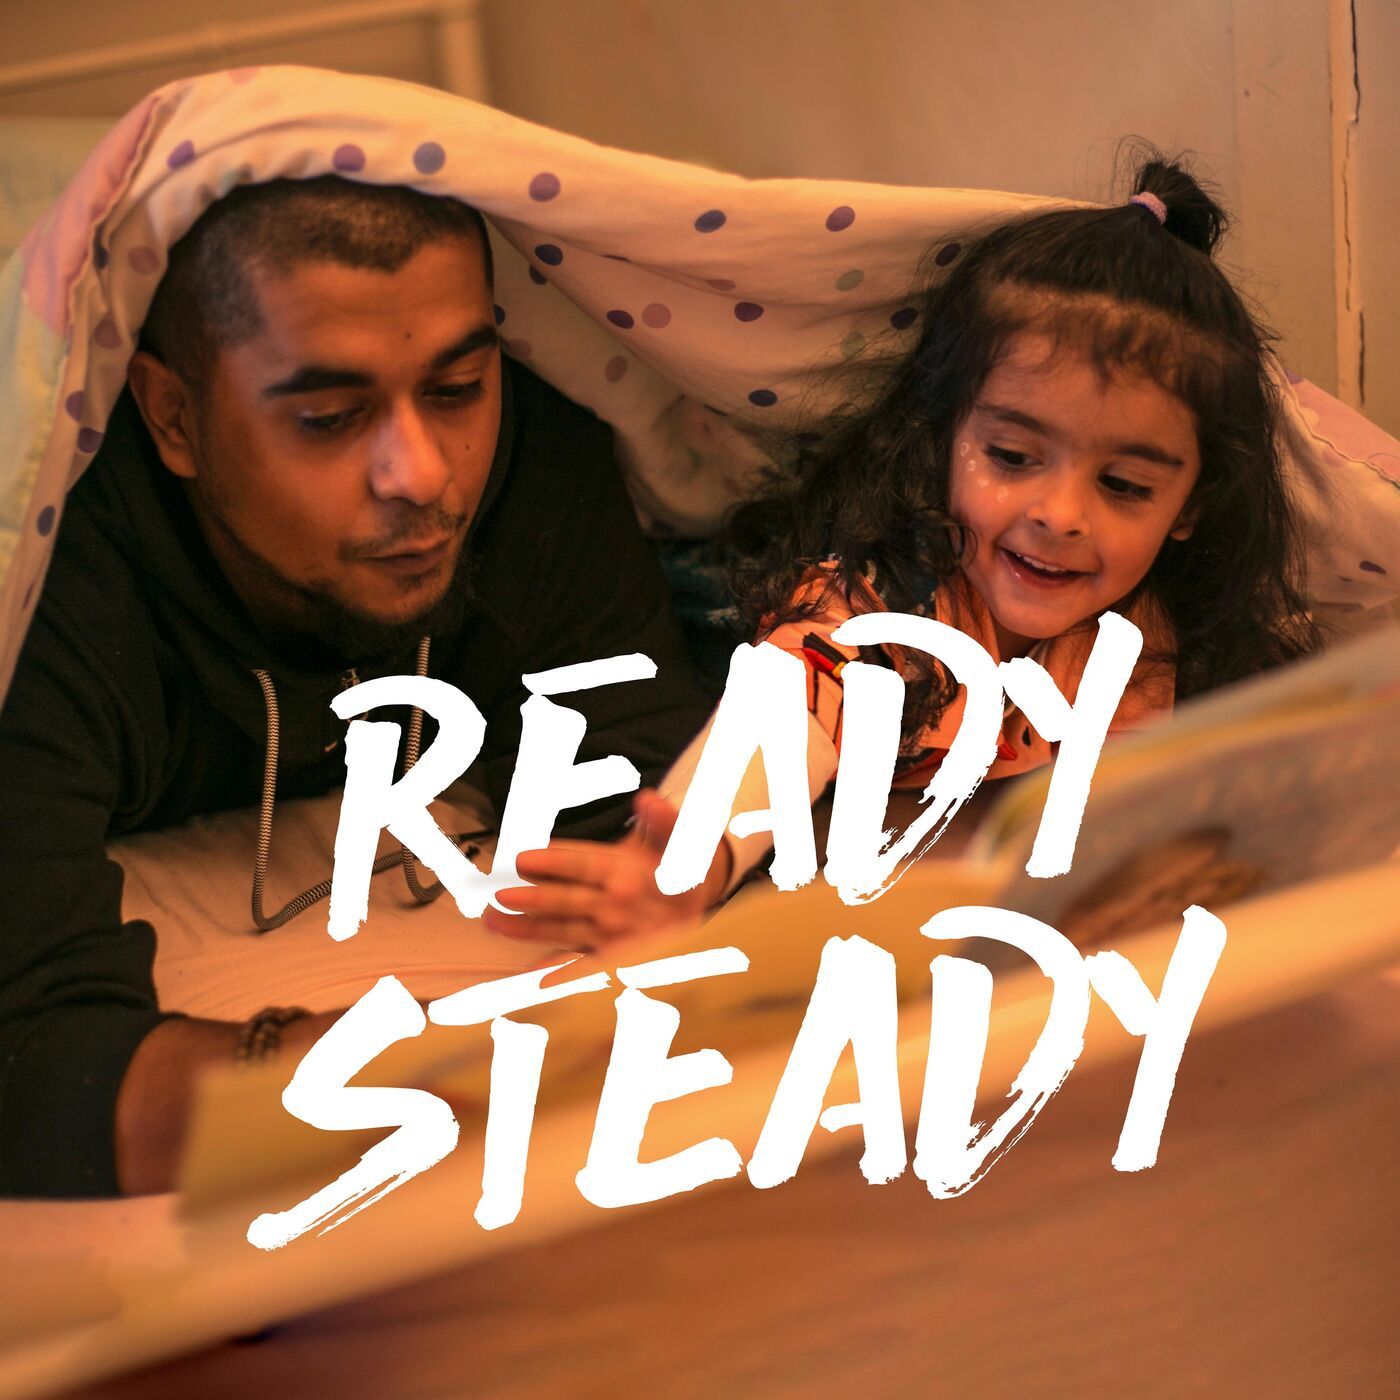 Ready Steady: One Picture= A Thousand Words! (Ep. 4)